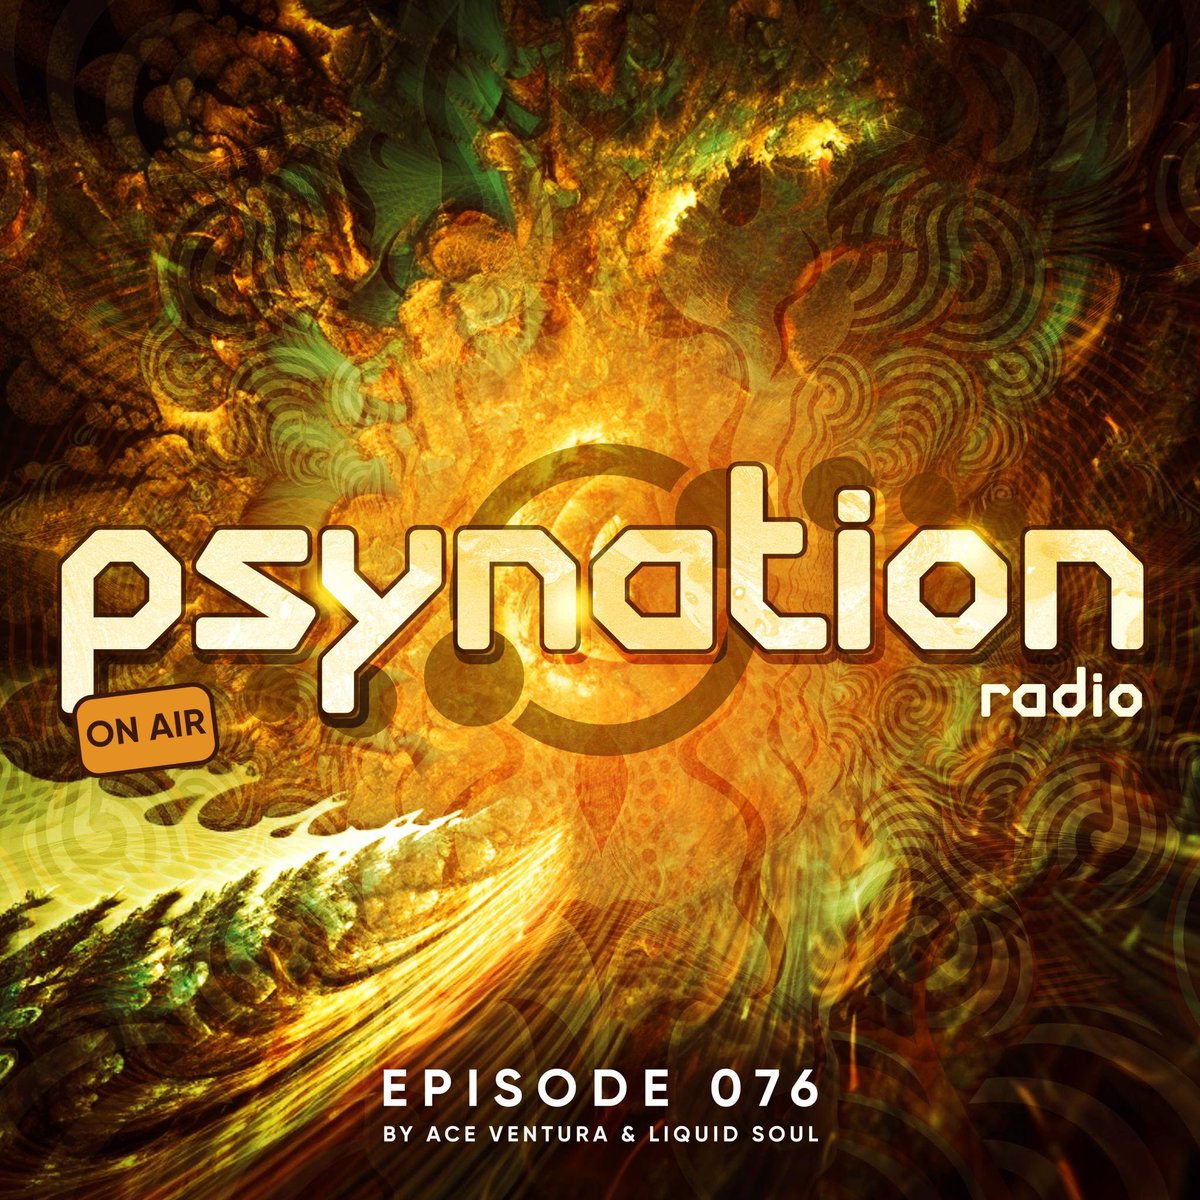 Our remix to @astralprojection - Y Salem is broadcasted on @psynationradio  by the Masters @dj_aceventura & @liquidsoul_official  Episode #076 including o guest mix by our Bro  @relativ.official ! What an episode must to check ! Check link on @psynationradio .
@ionomusic